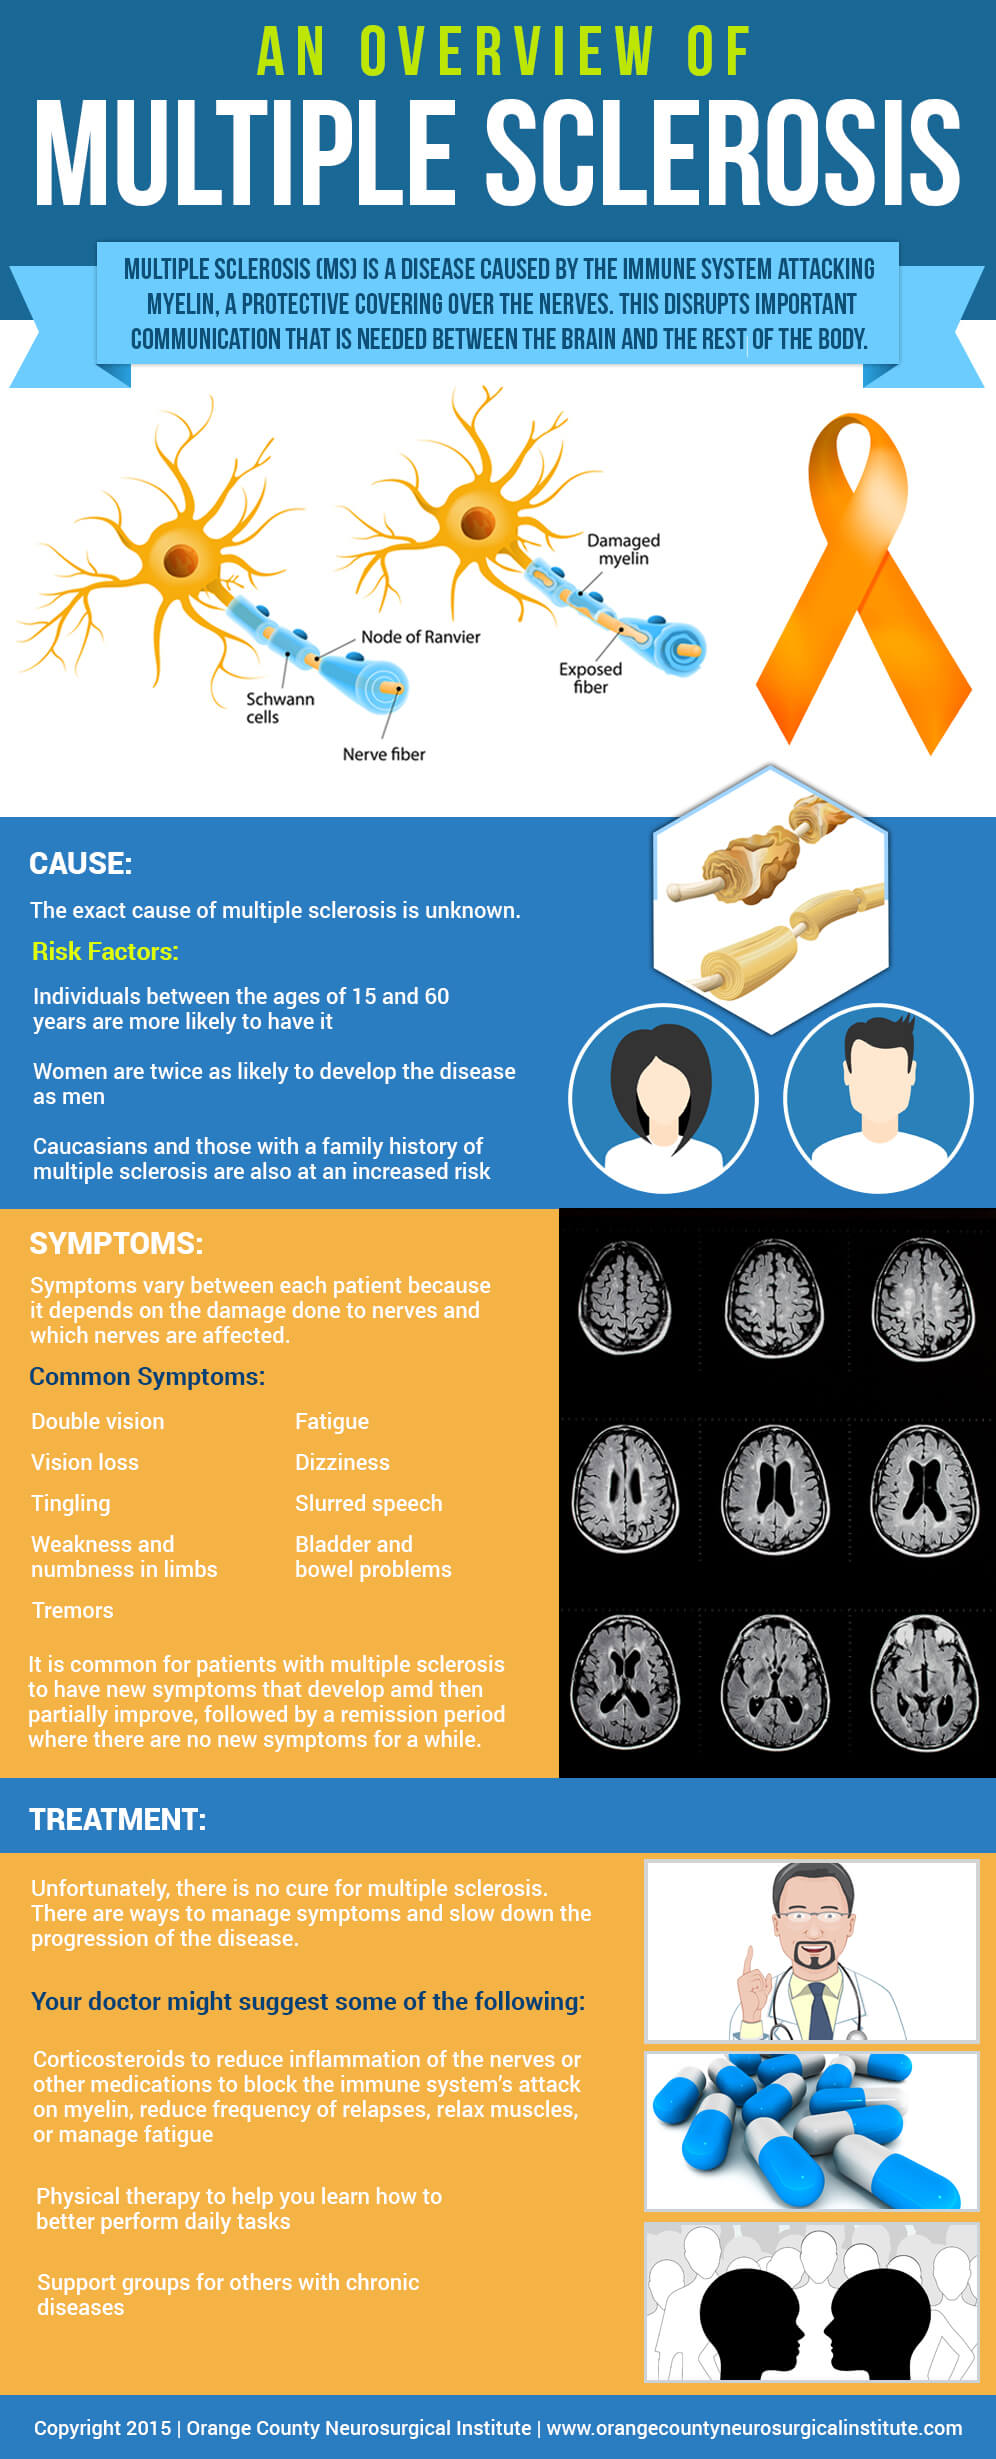 An-Overview-of-Multiple-Sclerosis-by-Orange-County-Neurosurgical-Institute-infographic-plaza